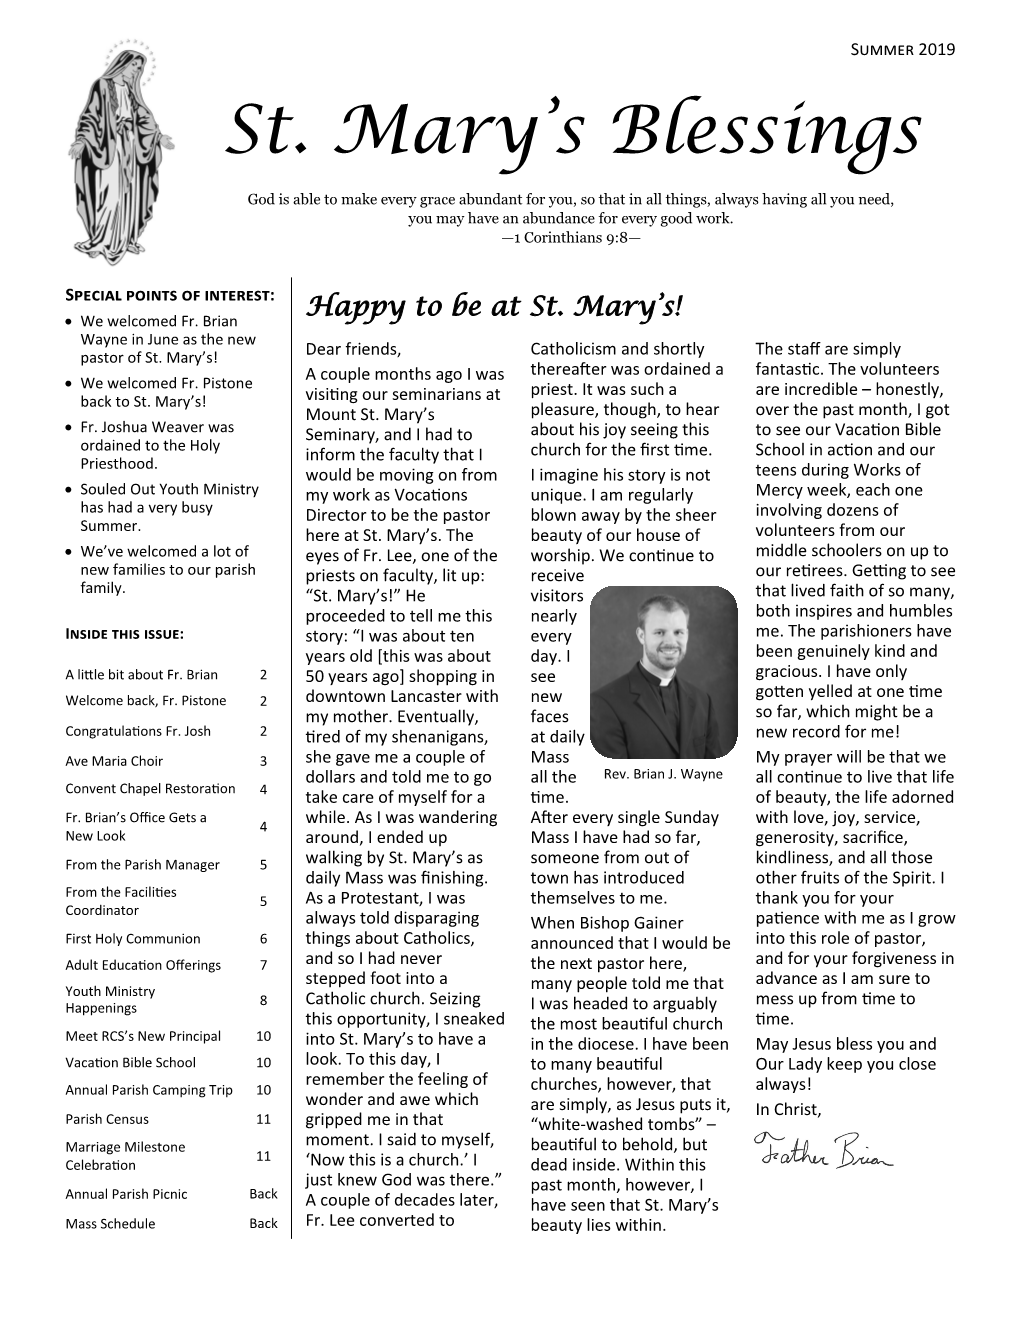 St. Mary's Blessings